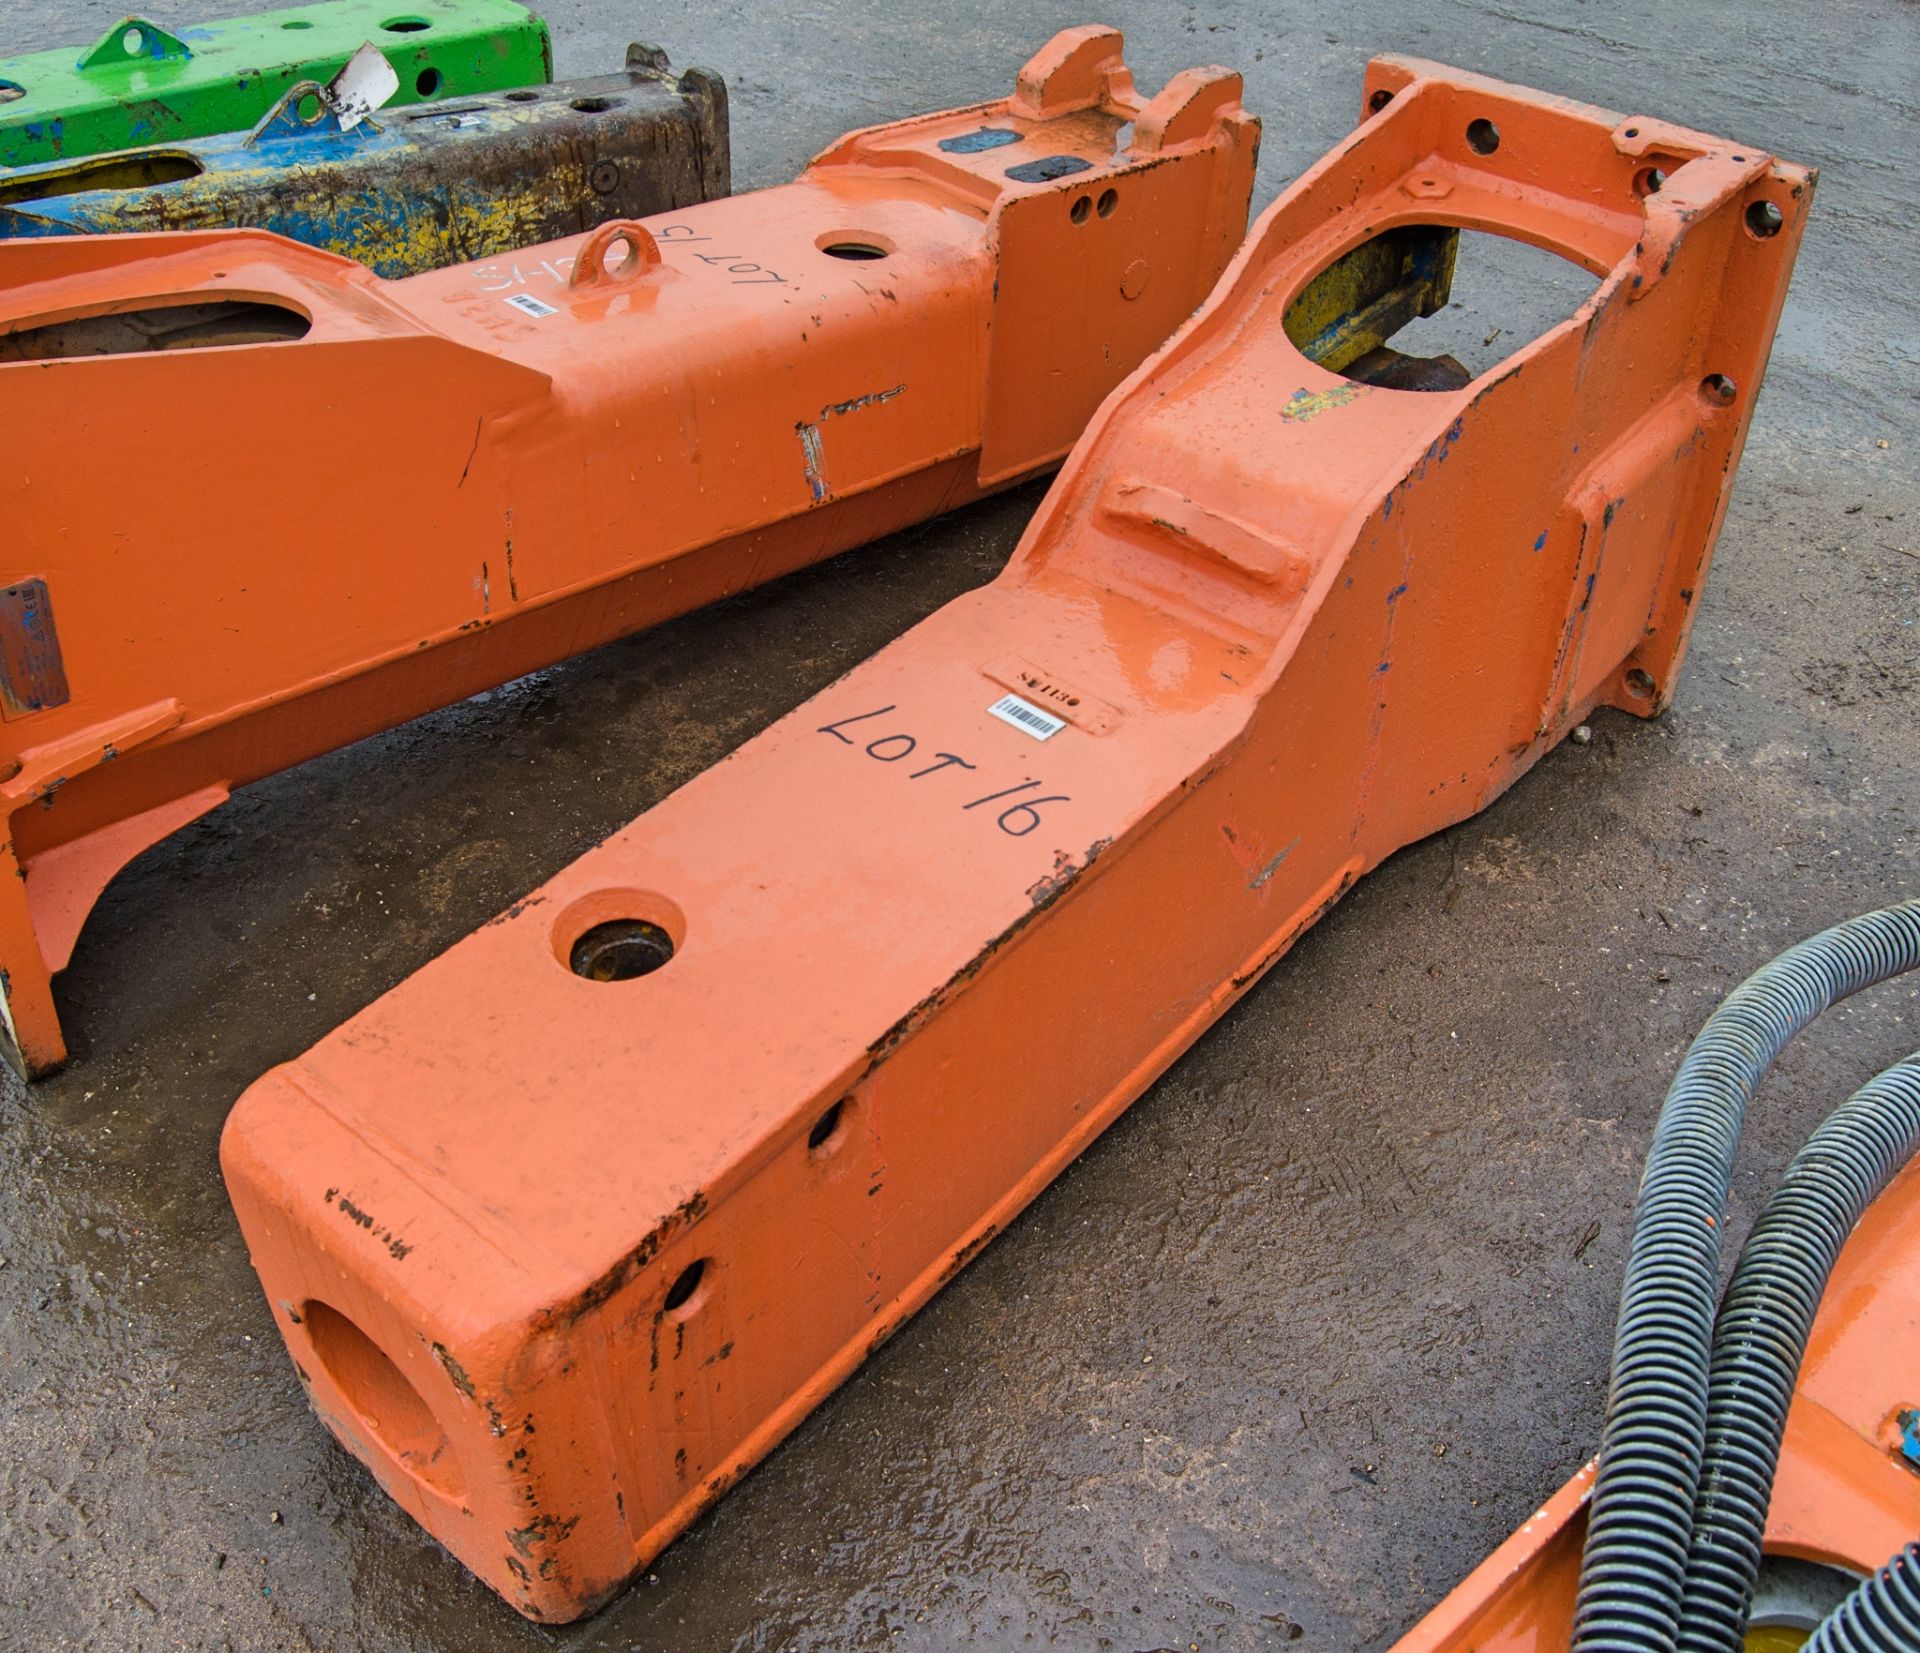 Hydraulic breaker to suit 13-18 tonne excavator SH1130 ** Incomplete and no headstock **